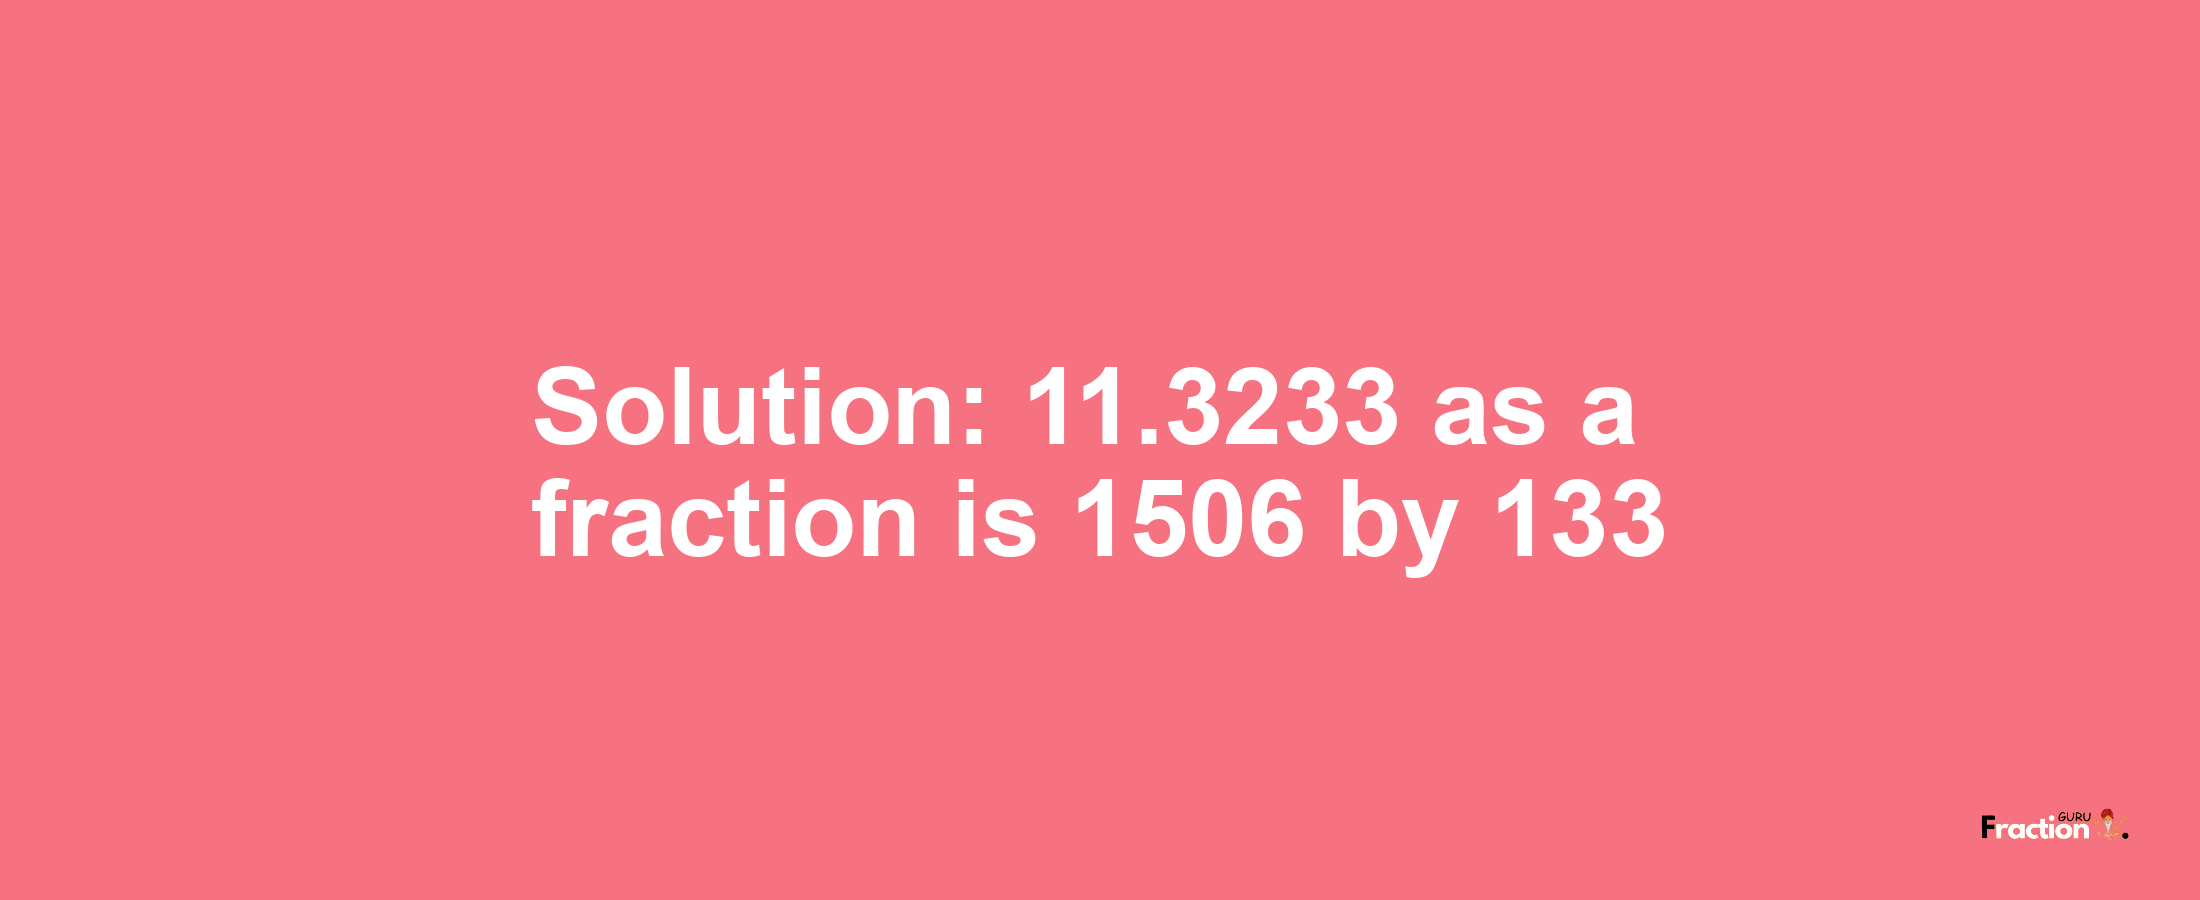 Solution:11.3233 as a fraction is 1506/133